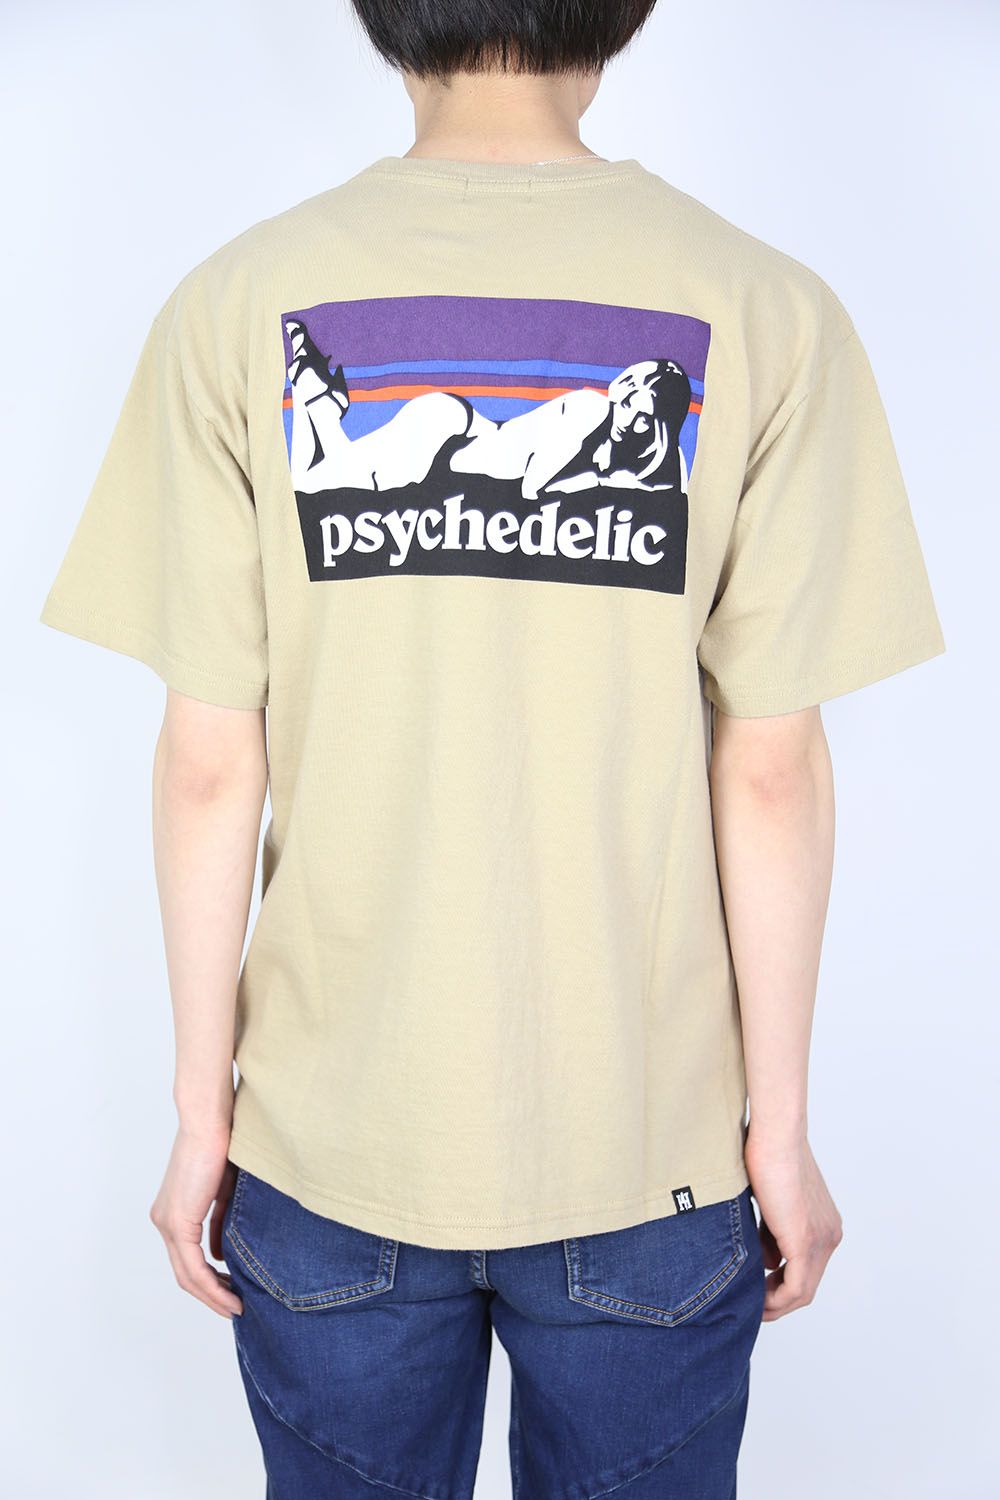 HYSTERIC GLAMOUR - PSYCHEDELIC Tシャツ / ブラック | Tempt